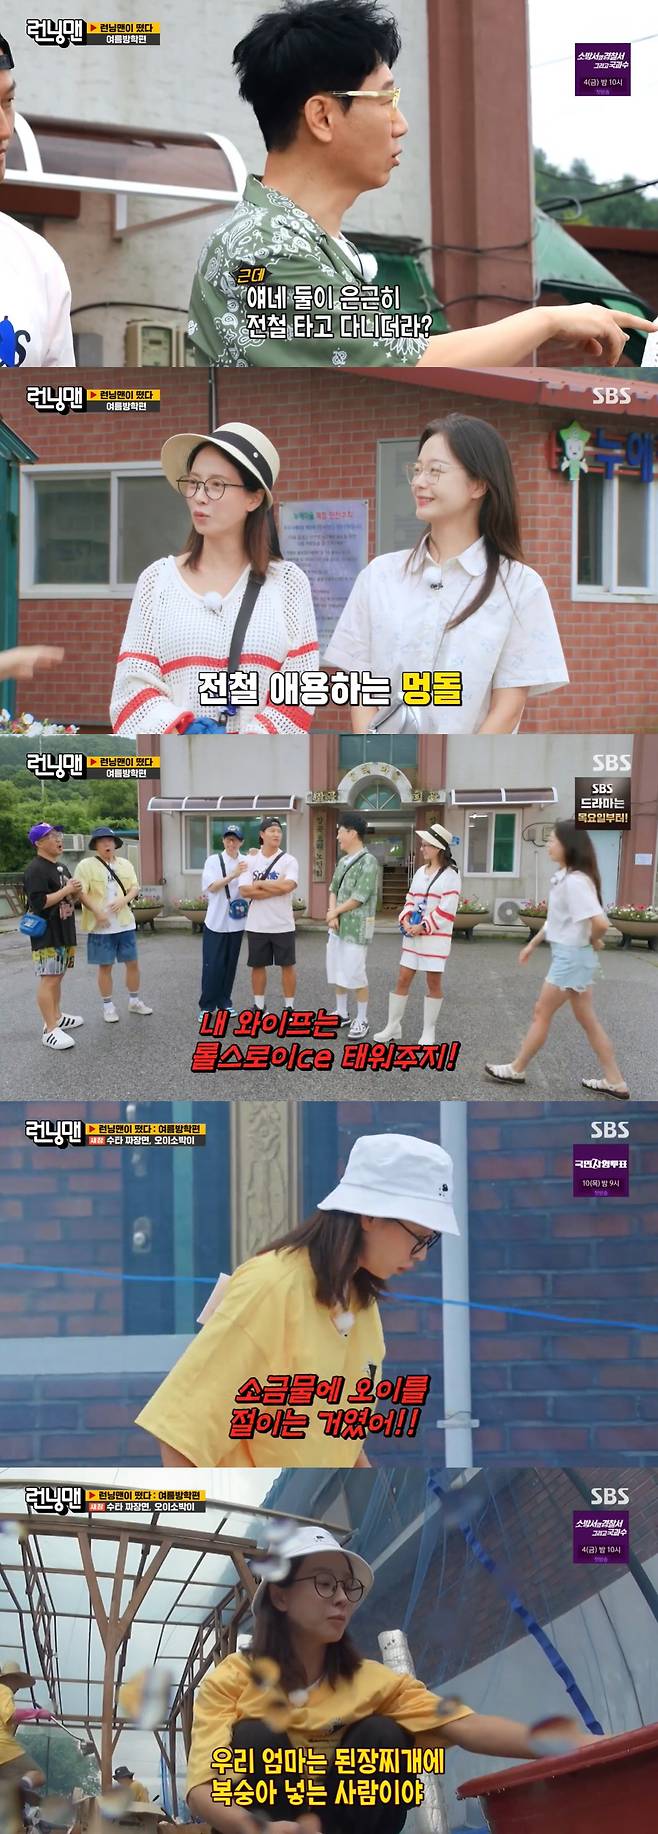 Comedian Yoo Jae-Suk showed off his chemistry with actor Song Ji-hyo.SBS Running Man broadcasted on the 30th was decorated with Running Man - Summer Vacation, and members who visited Gangwon-do grandmothers house started to help their full-time job.Ji Suk-jin saw Song Ji-hyo and Jeon So-min and was amazed that they both ran quietly on the subway.Song Ji-hyo was more eye-catching when he announced that his father was doing a passenger ship business in Tongyeong in Running Man.Song Ji-hyo and Jeon So-min reacted casually, and Haha told Ji Suk-jin, Take the subway. Its free.Yoo Jae-Suk looked at Ji Suk-jin and said, I ride this type of Taikan. Ji Suk-jin was ashamed to say, Why do you say that? Yoo Jae-Suk said, Ive been in my car for five years now.Kim Jong-kook added, Ive ridden 40,000 kilometers in 10 years.Jeon So-min shook his head and laughed when he said, If you get married, you can ride that car.Kim Jong-kook said, When I get married, I will buy a new car. My wife will give me a Rolls-Royce ride.The members were Yoo Jae-Suk, Ji Suk-jin, Kim Jong-kook, and Jeon So-min, Soft Construction with Boiled Beans (Soft Construction with Boiled Beans (Haha, Song Ji-hyo and Yang Se-chan).Haha said, I do not like muzzle fighters very much. Lets show them. This is a war!Kim Jong-kook said, I stretch my waist and hold it with my hips. I use hamstrings.Song Ji-hyo of the New Cham team started making cucumber sobakyi. Song Ji-hyo confused, Wasnt you making cucumber chili? Cucumber chili was cucumber soaked? and said, My house doesnt know because we dont make kimchi.I can not cook my mother. He also said, I can not cook cucumbers. Song Ji-hyo and Haha told each other that their mothers were worse cooks; Haha said, Ive seen you eat and spit, and Song Ji-hyo said, My mother is a person who puts peaches in miso soup.Haha nodded to Song Ji-hyo, I think I know who you look like. After a while, the field team arrived after work and ate delicious japanese noodles prepared by the new team.Yoo Jae-suk said, (Song) Ji-hyo is almost like my own brother. He almost reports to me. I called him because I couldnt call back, and he said, Im in the shower now. I said, Then you dont have to answer, and he said, No, my brother. Ill wash up and call you.The next day, he said, My brother is so good today, Im going to play golf. Ji Suk-jin told Song Ji-hyo, Do you have a cell phone when you shower?Song Ji-hyo said, I usually take a shower while watching YouTube. I tend to watch the rhetoric. 